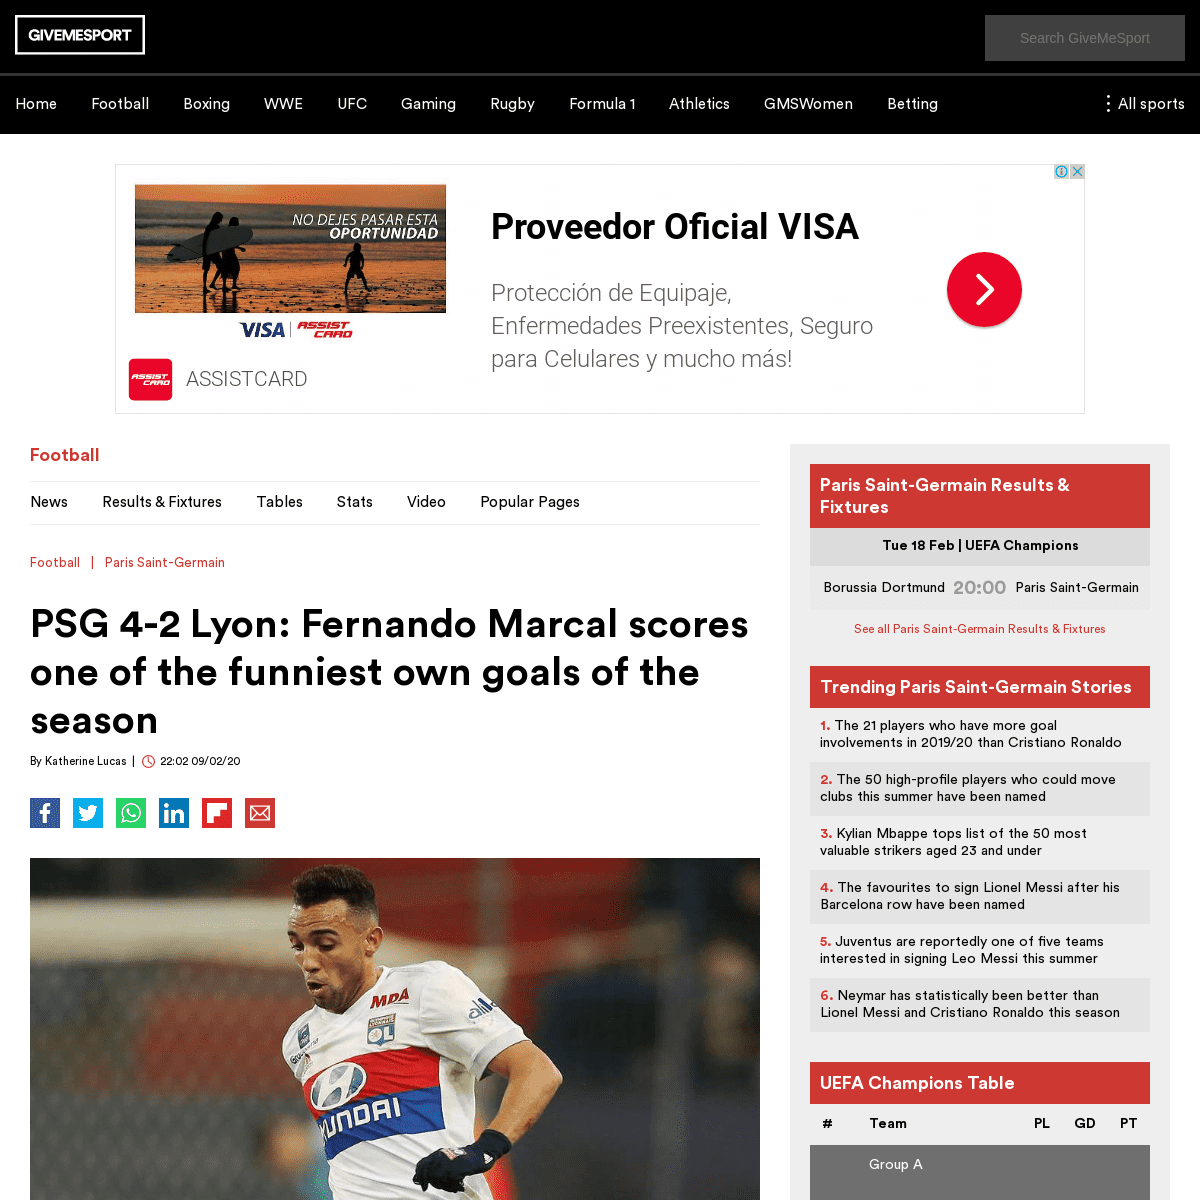 A complete backup of www.givemesport.com/1545515-psg-42-lyon-fernando-marcal-scores-one-of-the-funniest-own-goals-of-the-season